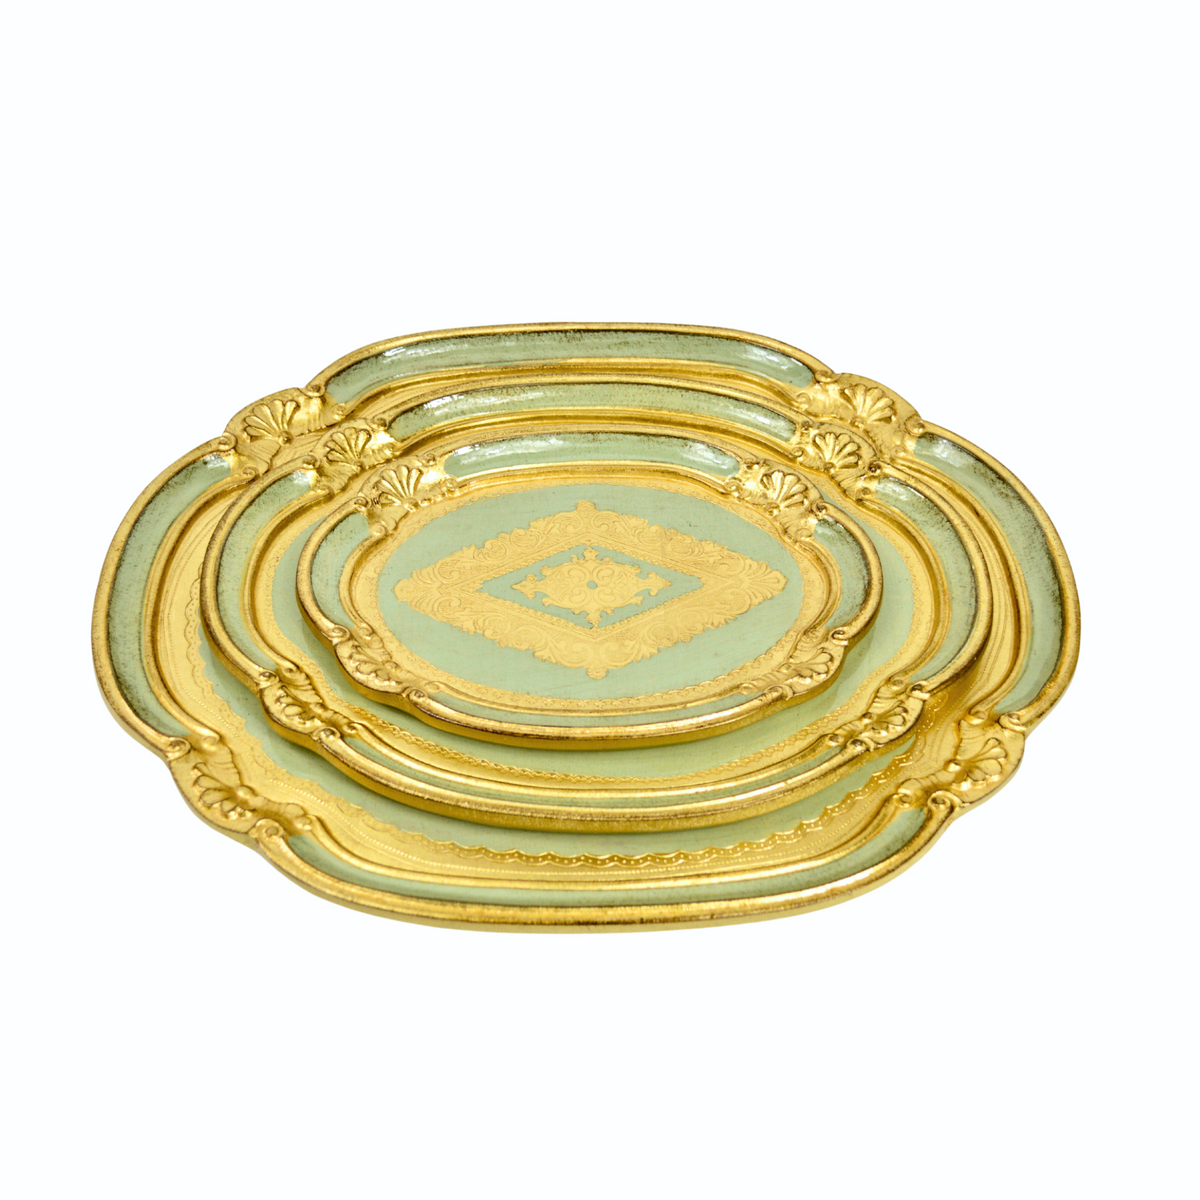 Florentine Carved Wood Oval Tray, Multiple colors and sizes - My Italian Decor